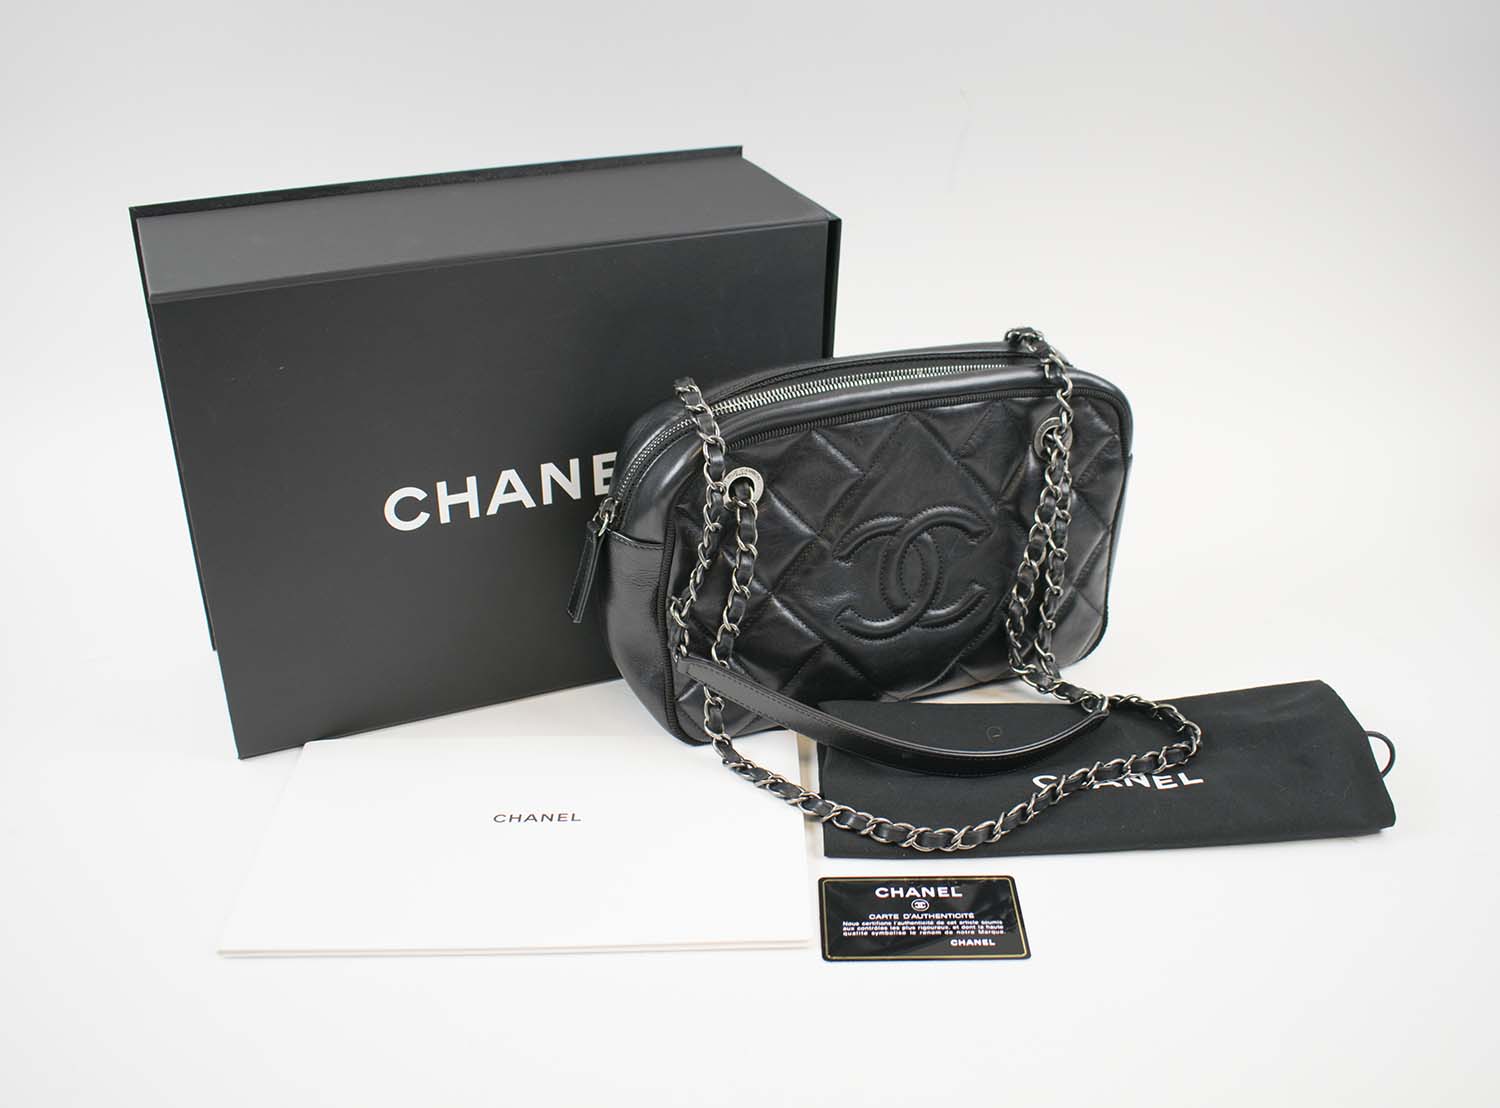 CHANEL BALLERINE RIBBON PIPING CAMERA BAG, black quilted leather